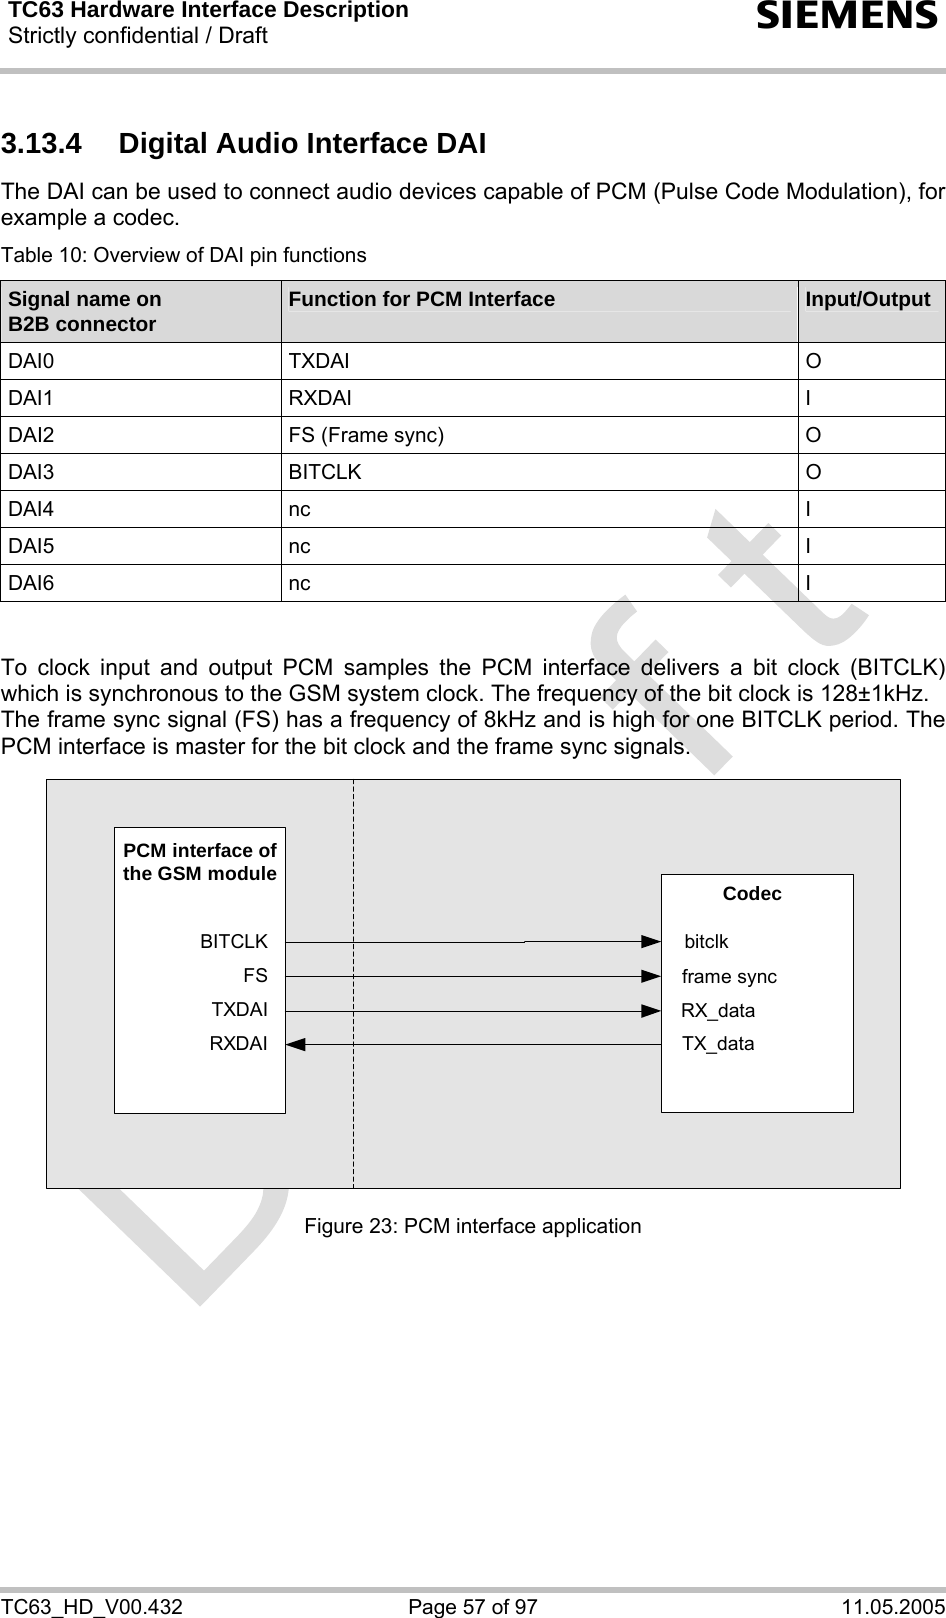 TC63 Hardware Interface Description Strictly confidential / Draft  s TC63_HD_V00.432  Page 57 of 97  11.05.2005 3.13.4  Digital Audio Interface DAI The DAI can be used to connect audio devices capable of PCM (Pulse Code Modulation), for example a codec. Table 10: Overview of DAI pin functions Signal name on  B2B connector  Function for PCM Interface  Input/Output DAI0 TXDAI  O DAI1 RXDAI  I DAI2  FS (Frame sync)  O DAI3 BITCLK  O DAI4 nc  I DAI5 nc  I DAI6 nc  I   To clock input and output PCM samples the PCM interface delivers a bit clock (BITCLK) which is synchronous to the GSM system clock. The frequency of the bit clock is 128±1kHz.  The frame sync signal (FS) has a frequency of 8kHz and is high for one BITCLK period. The PCM interface is master for the bit clock and the frame sync signals.   BITCLKFSTXDAIRXDAIbitclkframe syncTX_dataRX_dataCodecPCM interface ofthe GSM module Figure 23: PCM interface application  